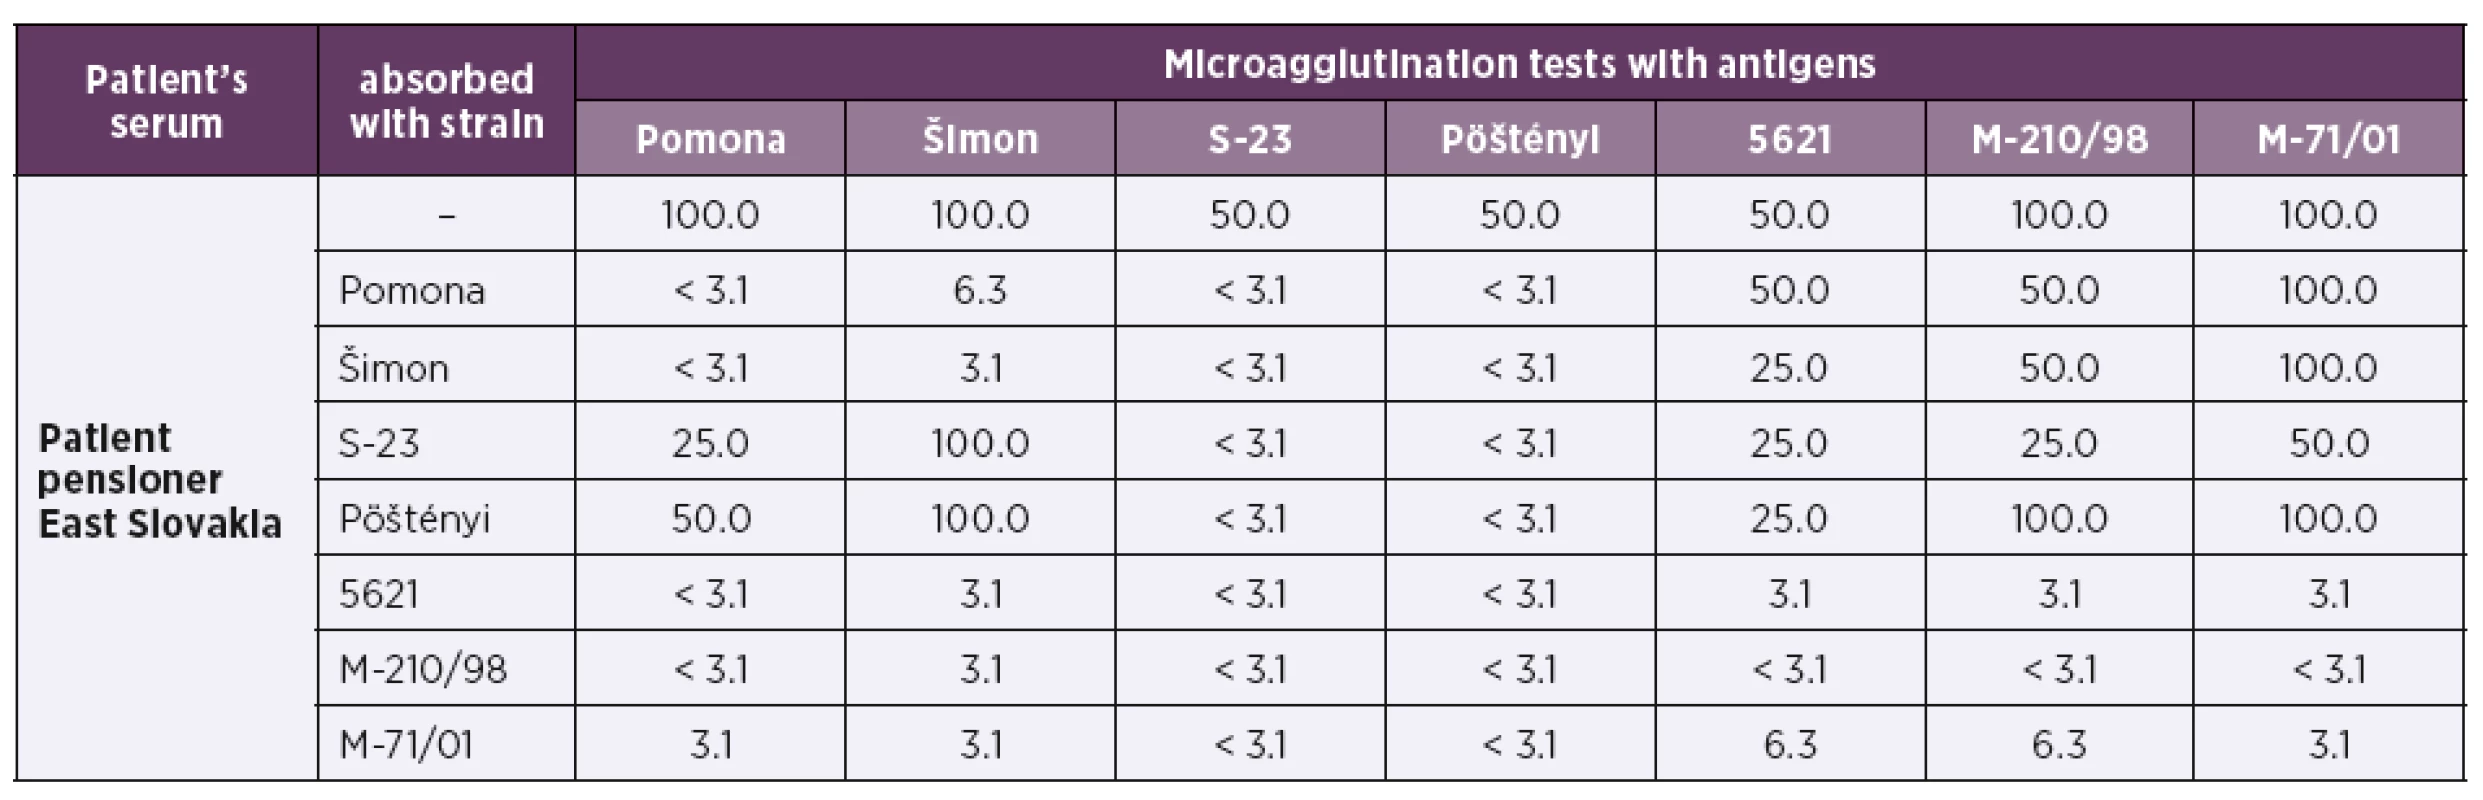 Results of agglutinin absorption tests of patient’s serum with Mozdok leptospirosis